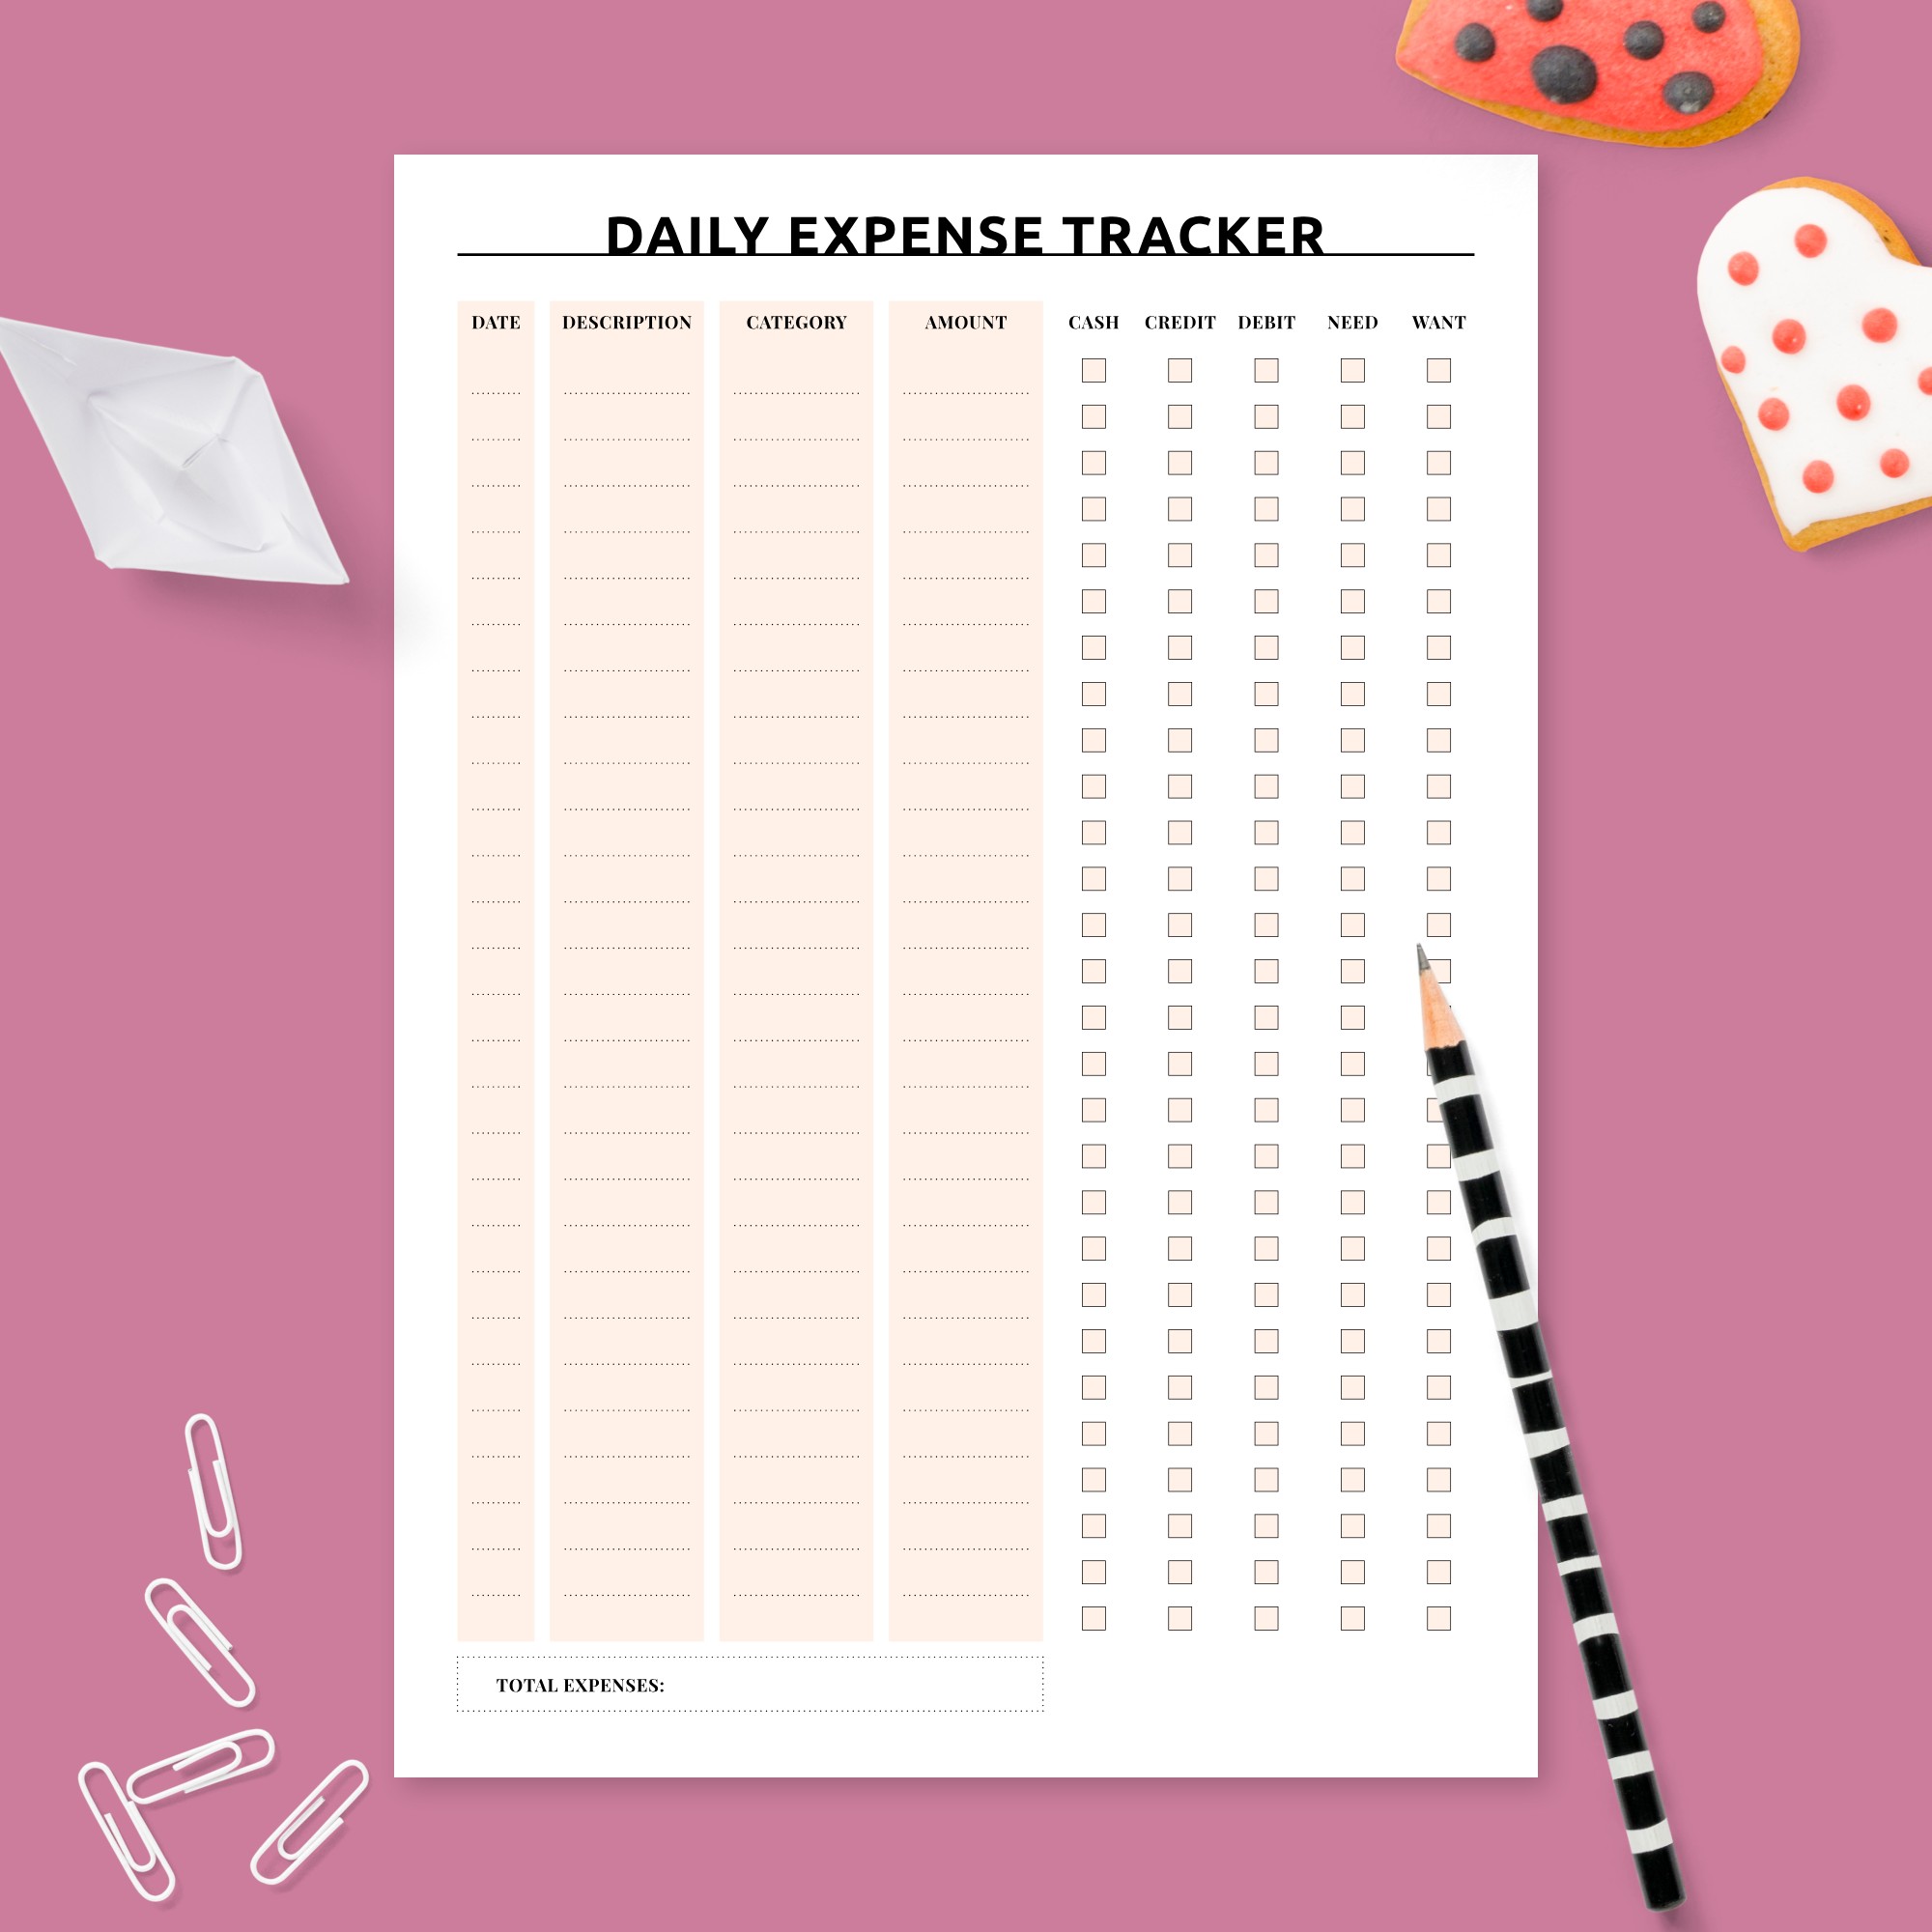 keeping track of daily expenses